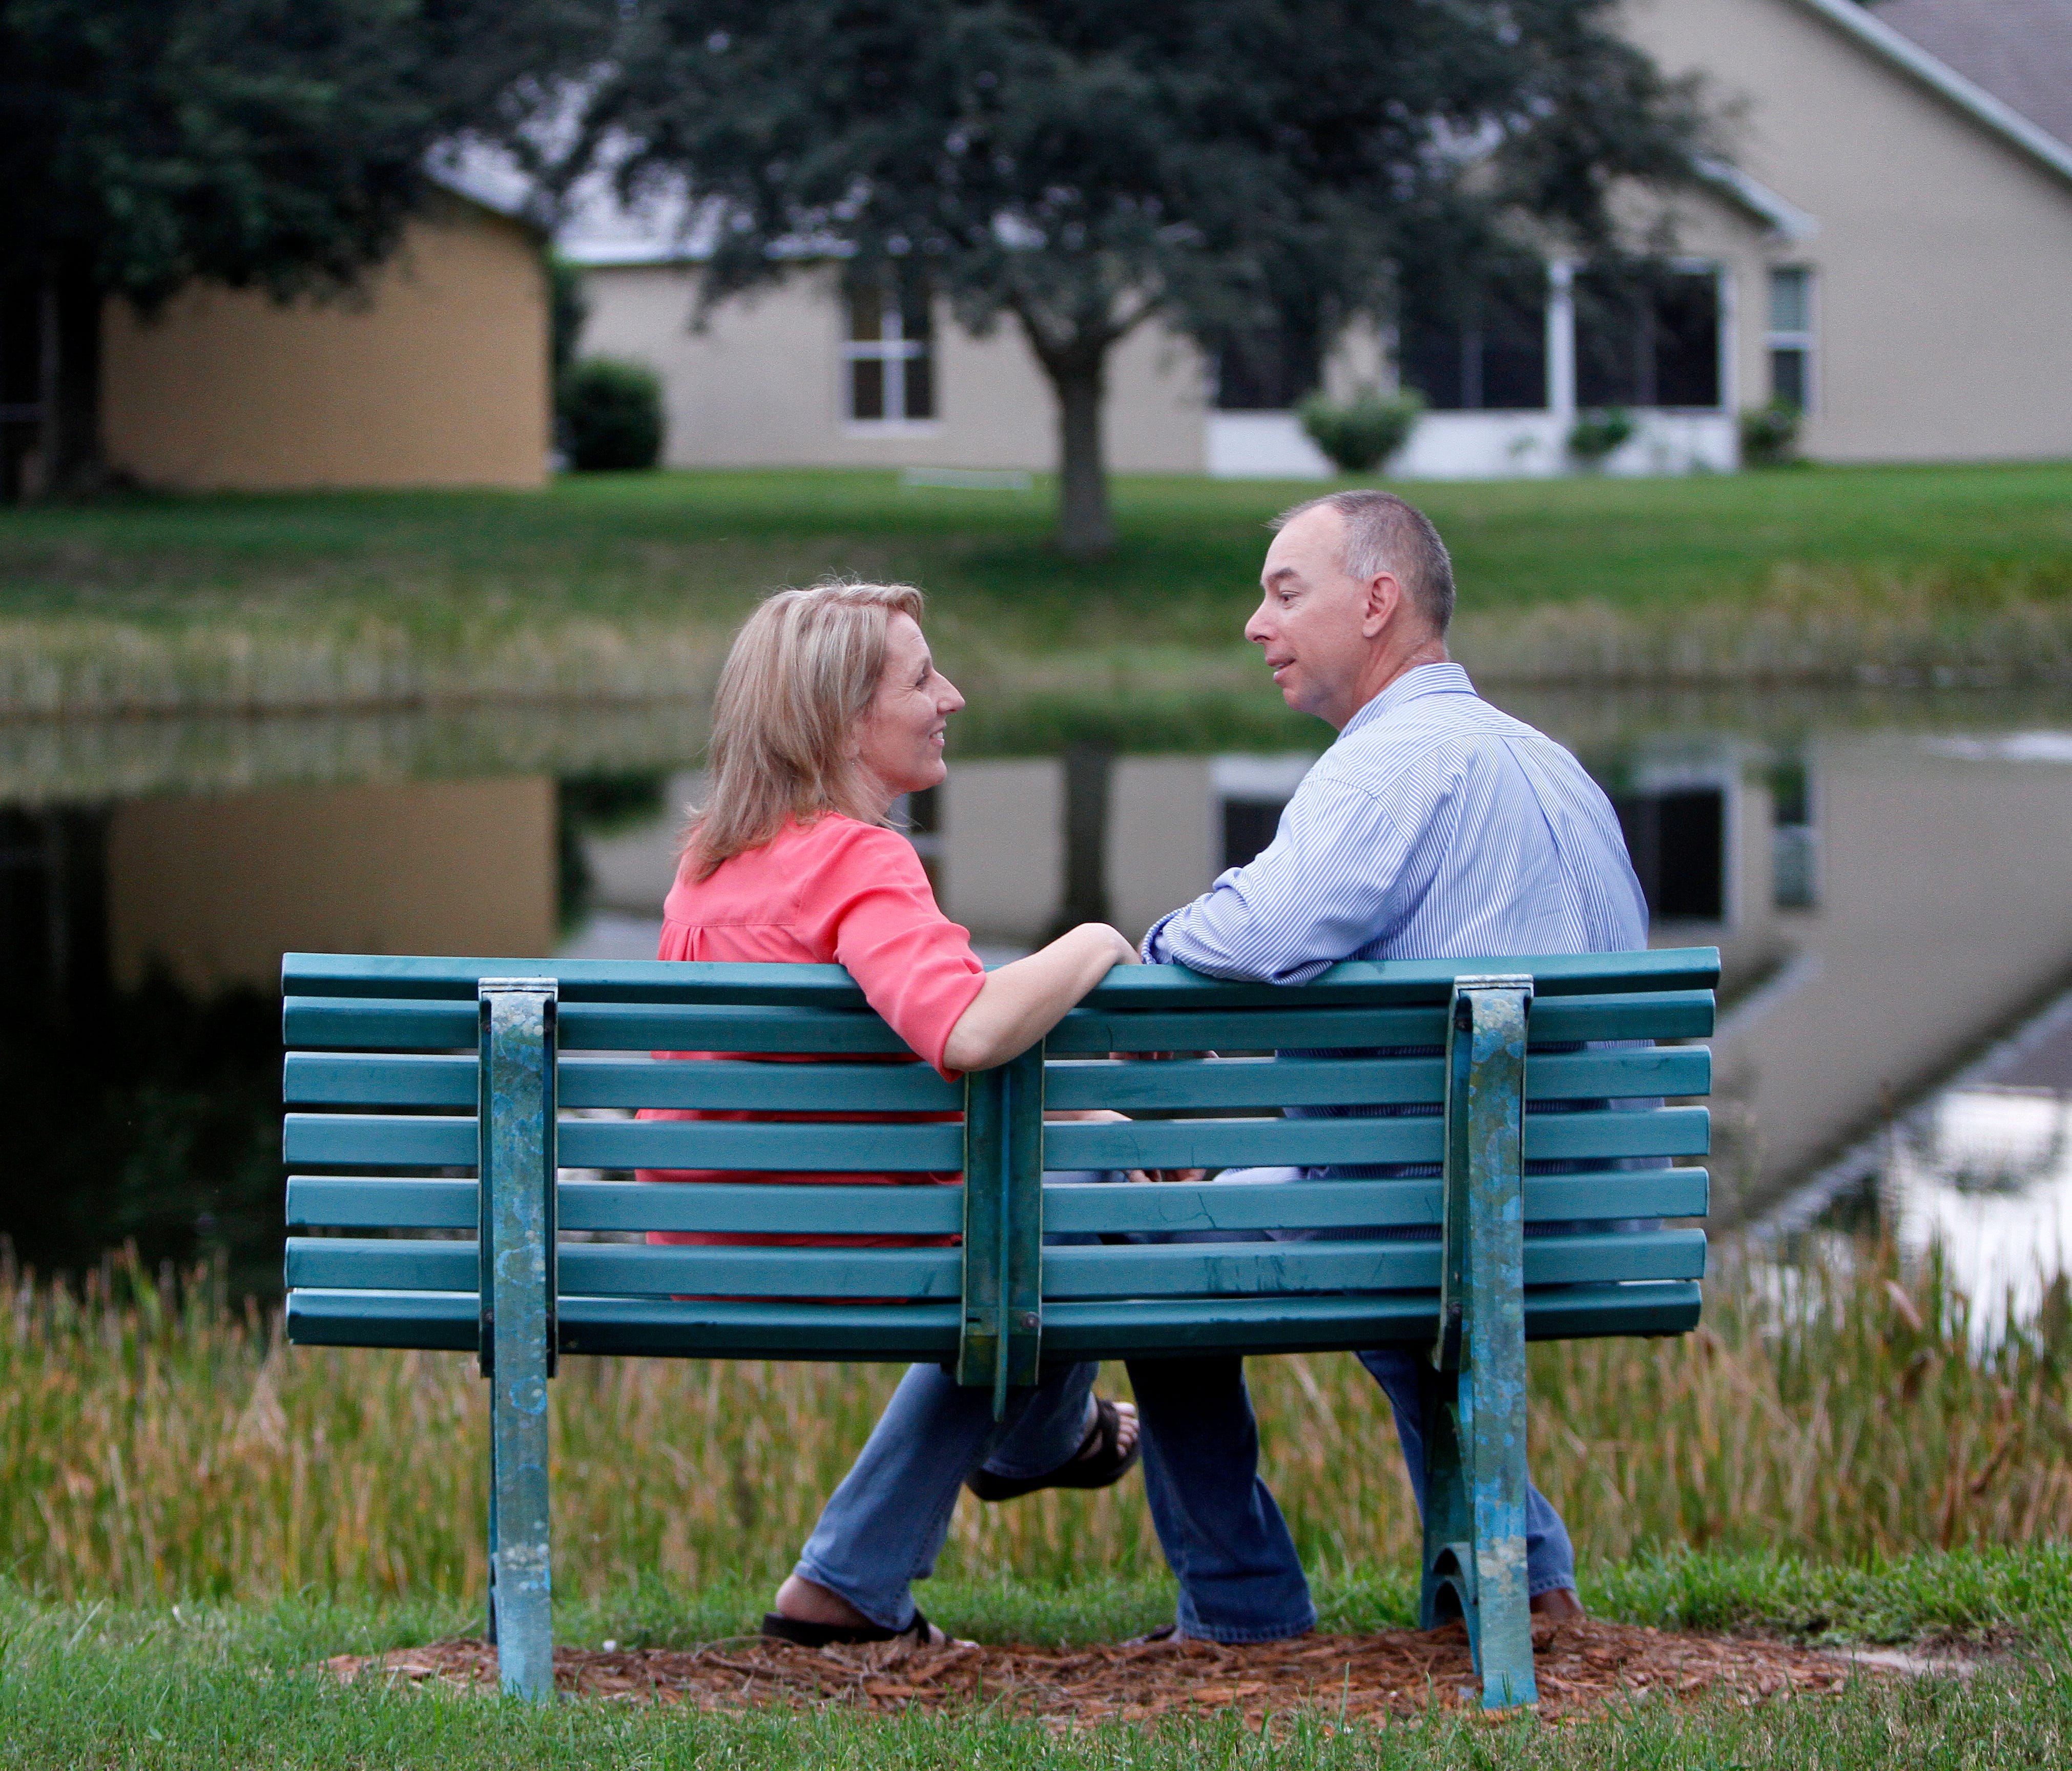 Paul Johnson and Shelly Osterhout, pictured Monday, September 28 sitting on the neighborhood bench where Paul proposed,  are inviting the public to crash their October 10 wedding reception at the Bell Tower Shops.